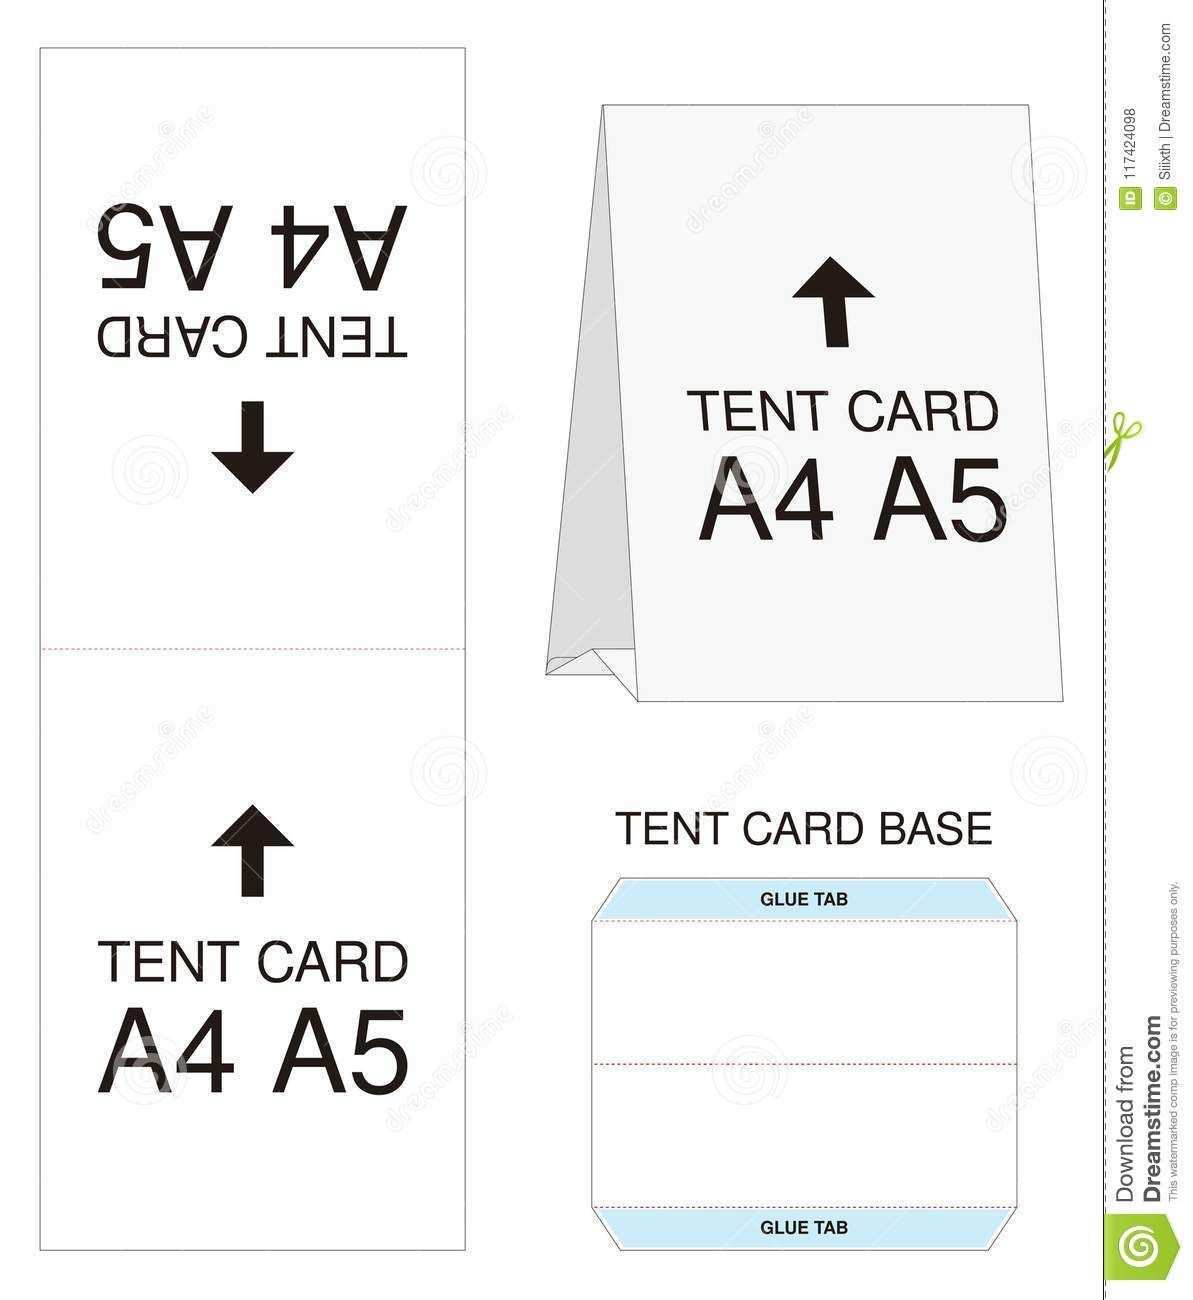 30 Visiting Tent Card Template A4 Now by Tent Card Template A4